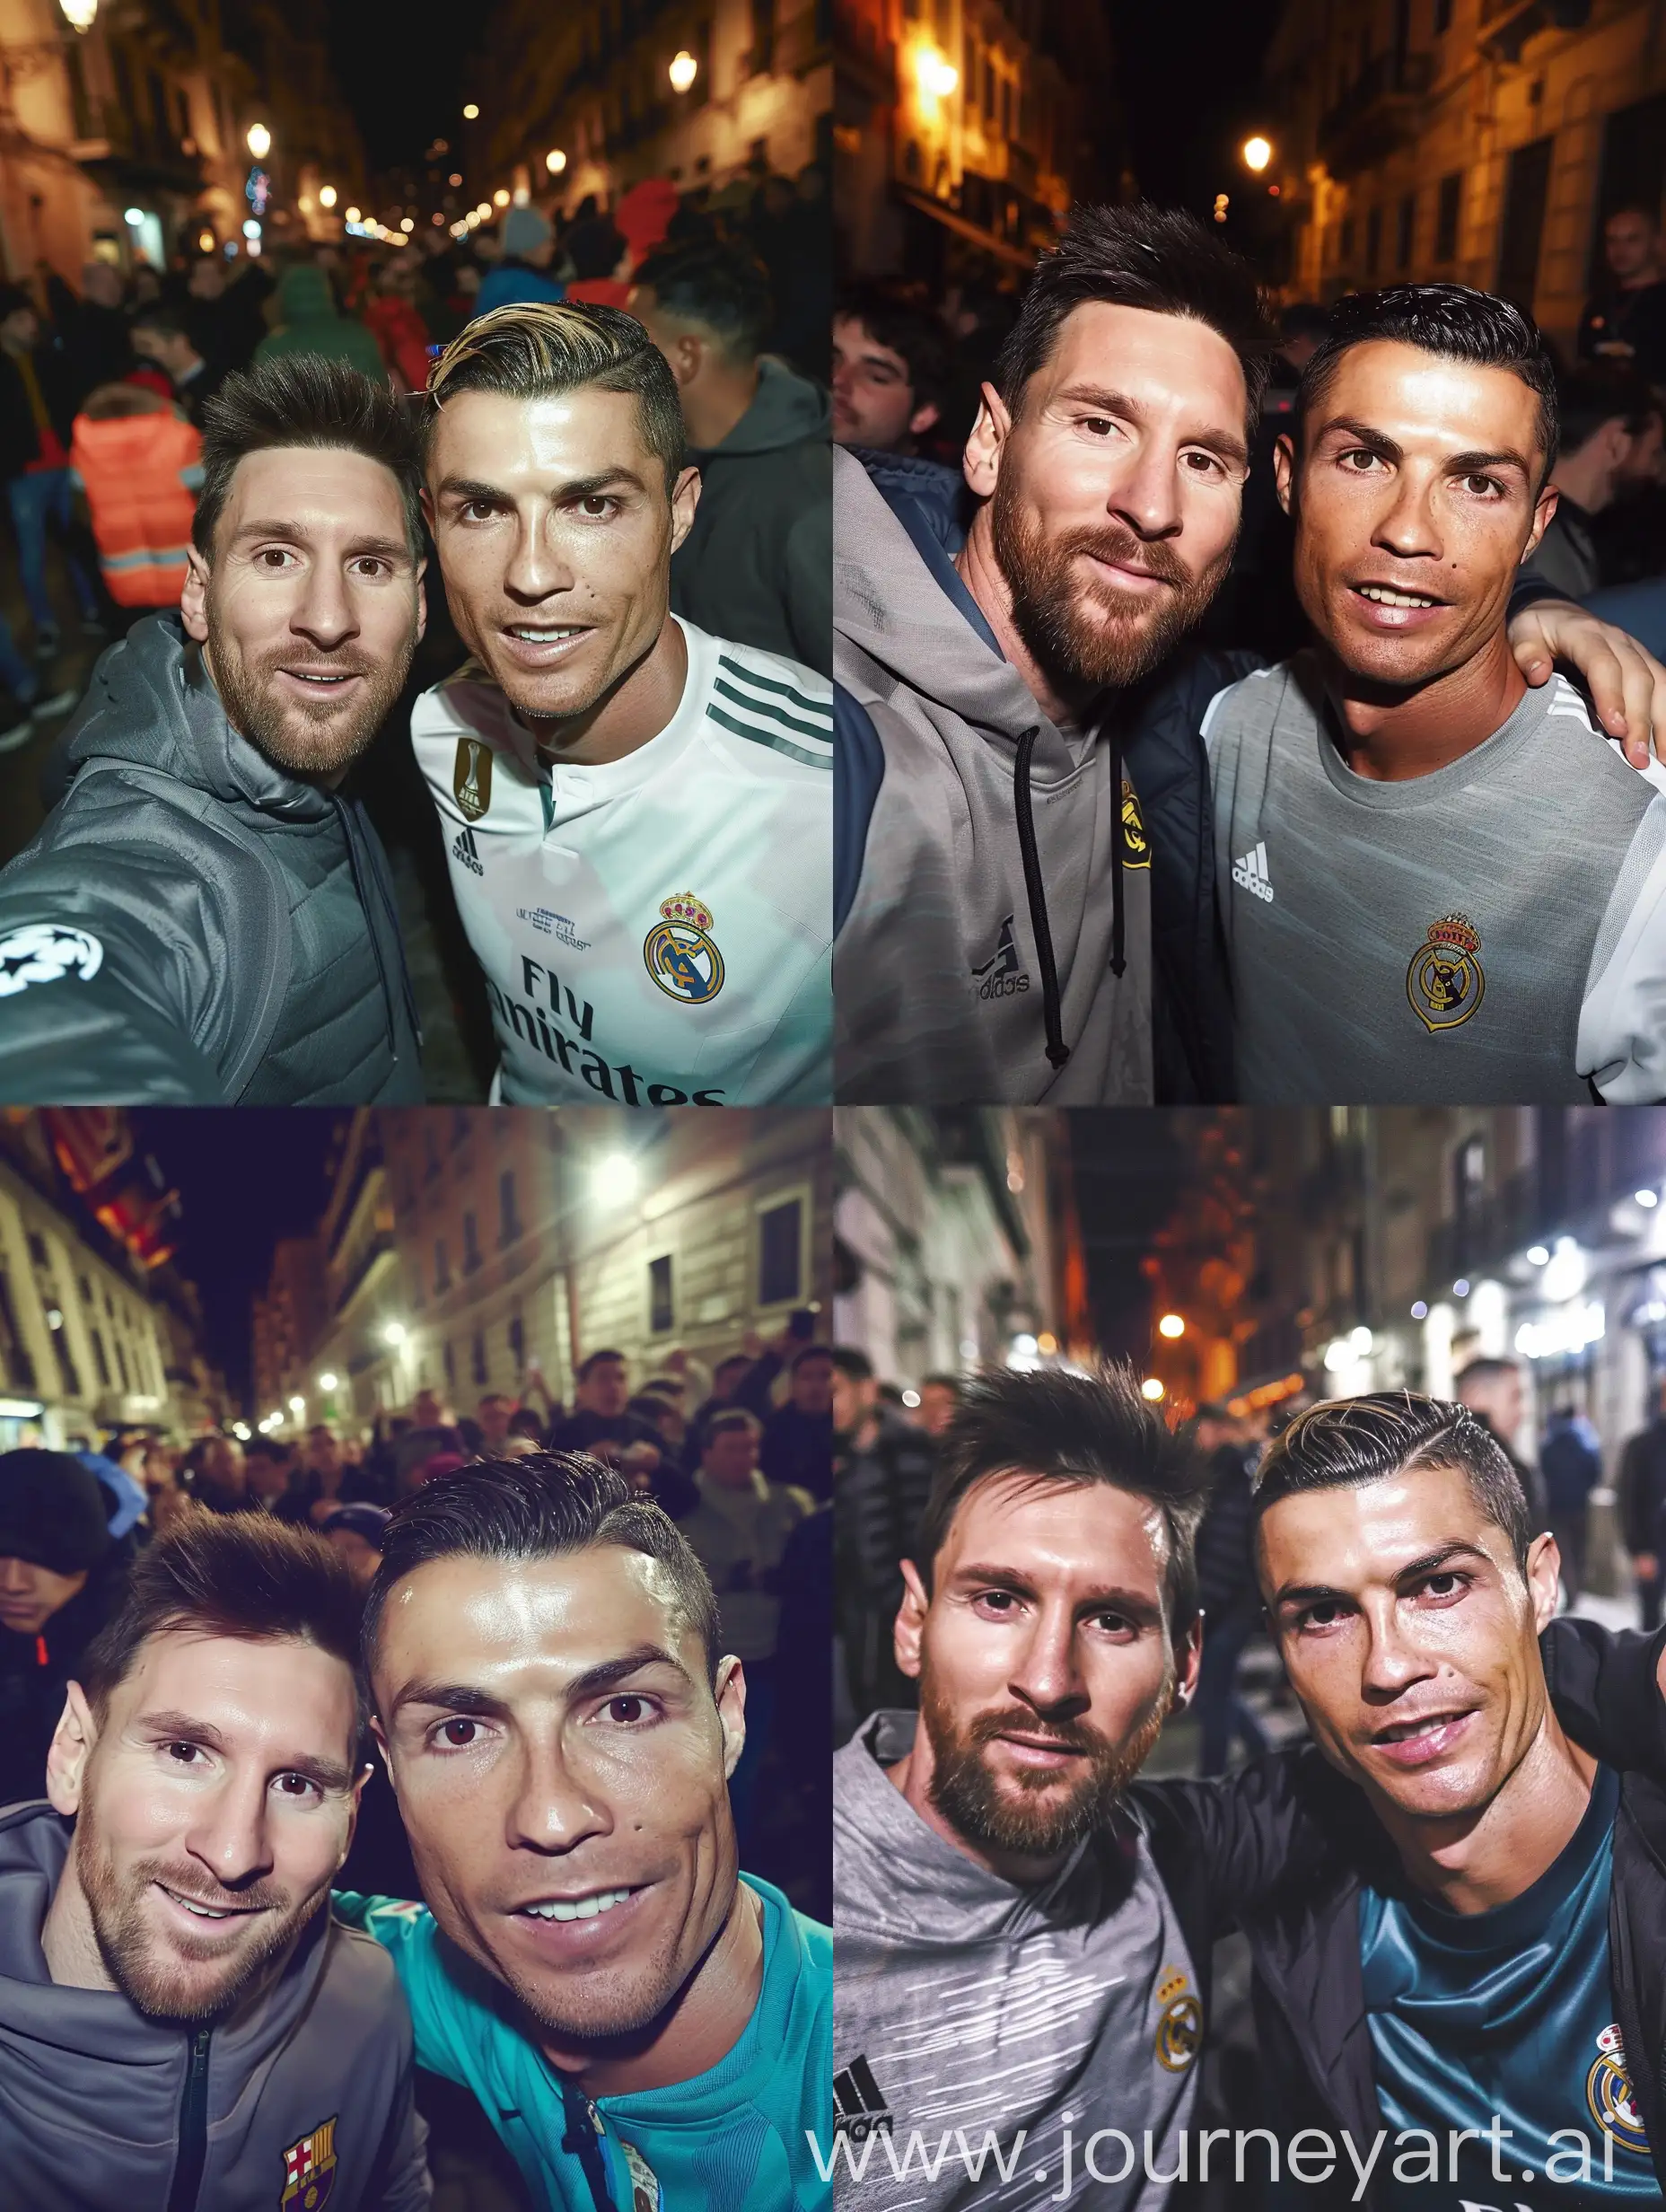 photo taken by a smartphone of lionel messi and cristiano ronaldo   together  in a street. night.